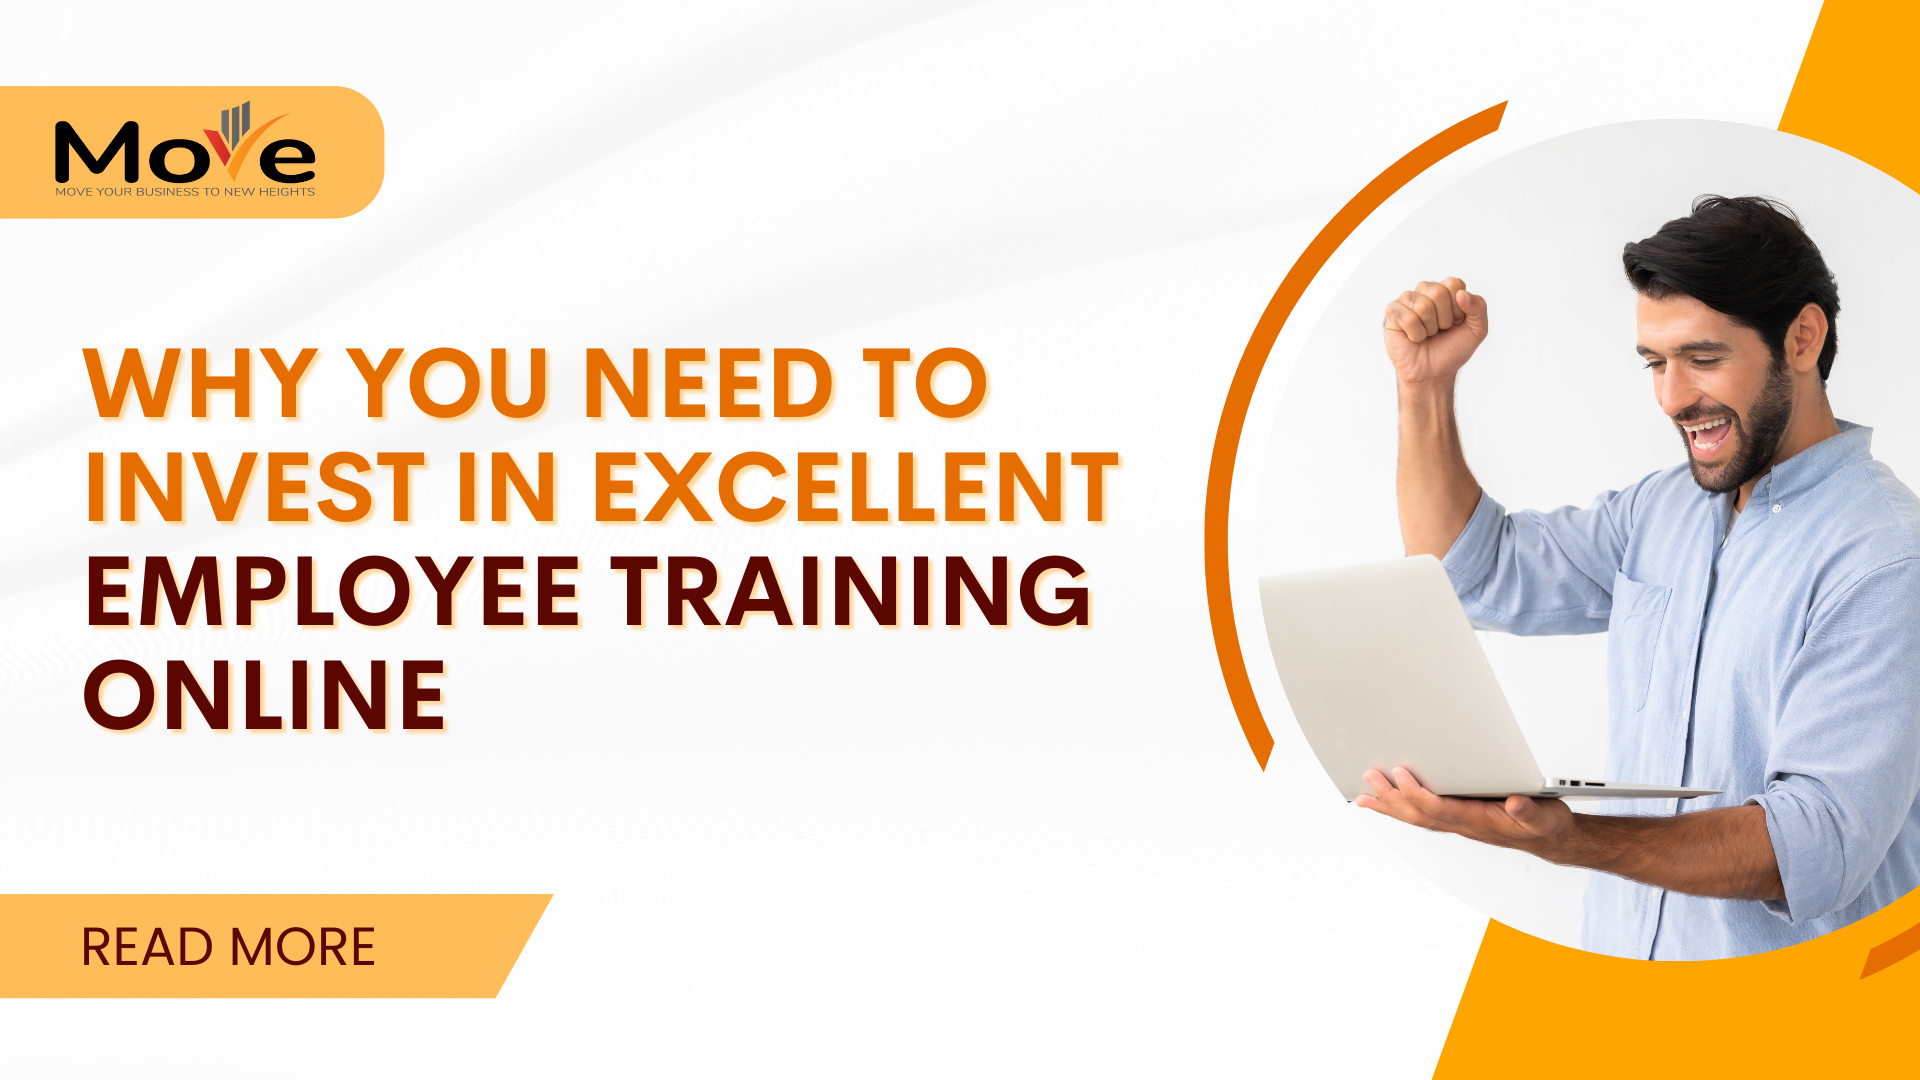 Why You Need to Invest in Excellent Employee Training Online